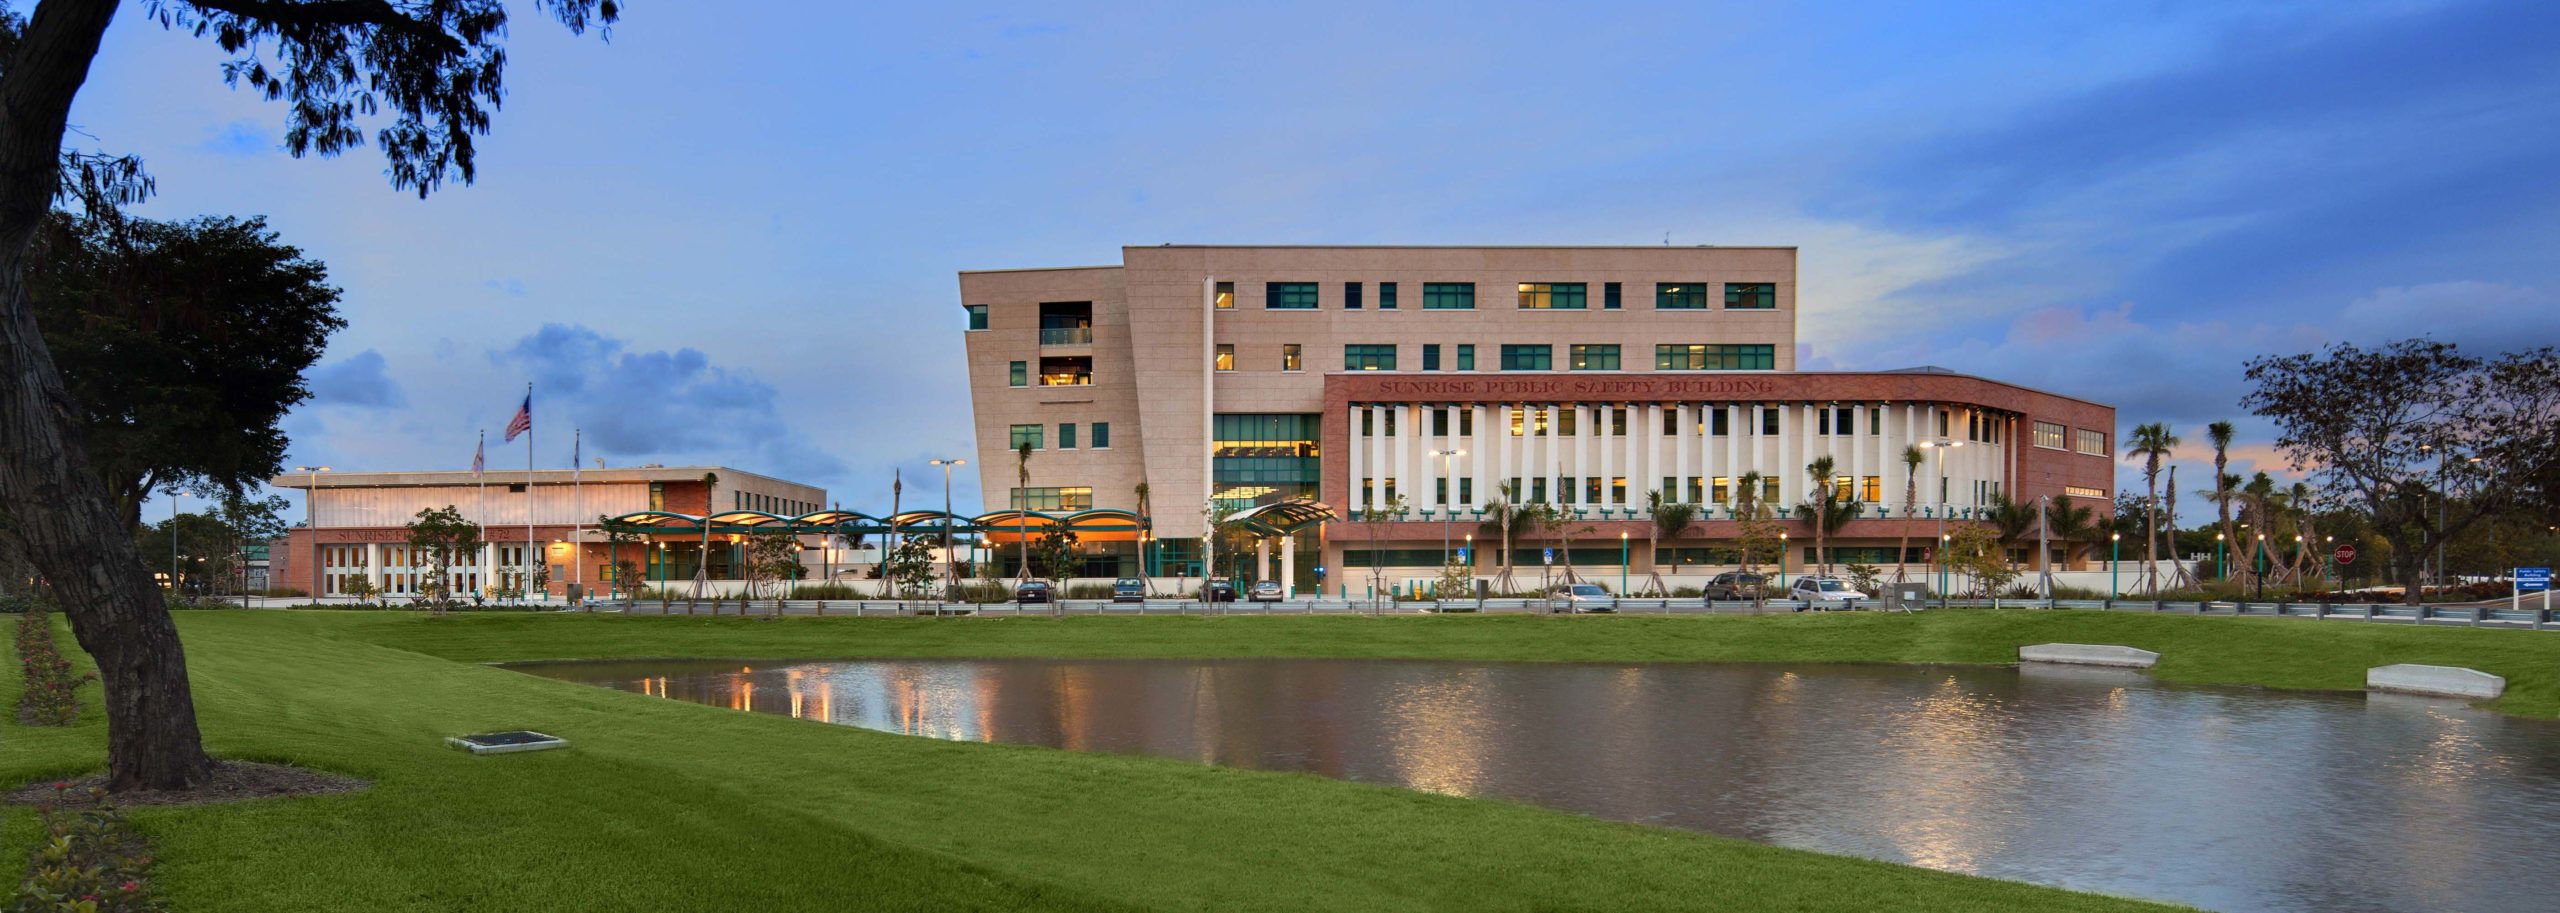 Sunrise Public Safety and Training Complex